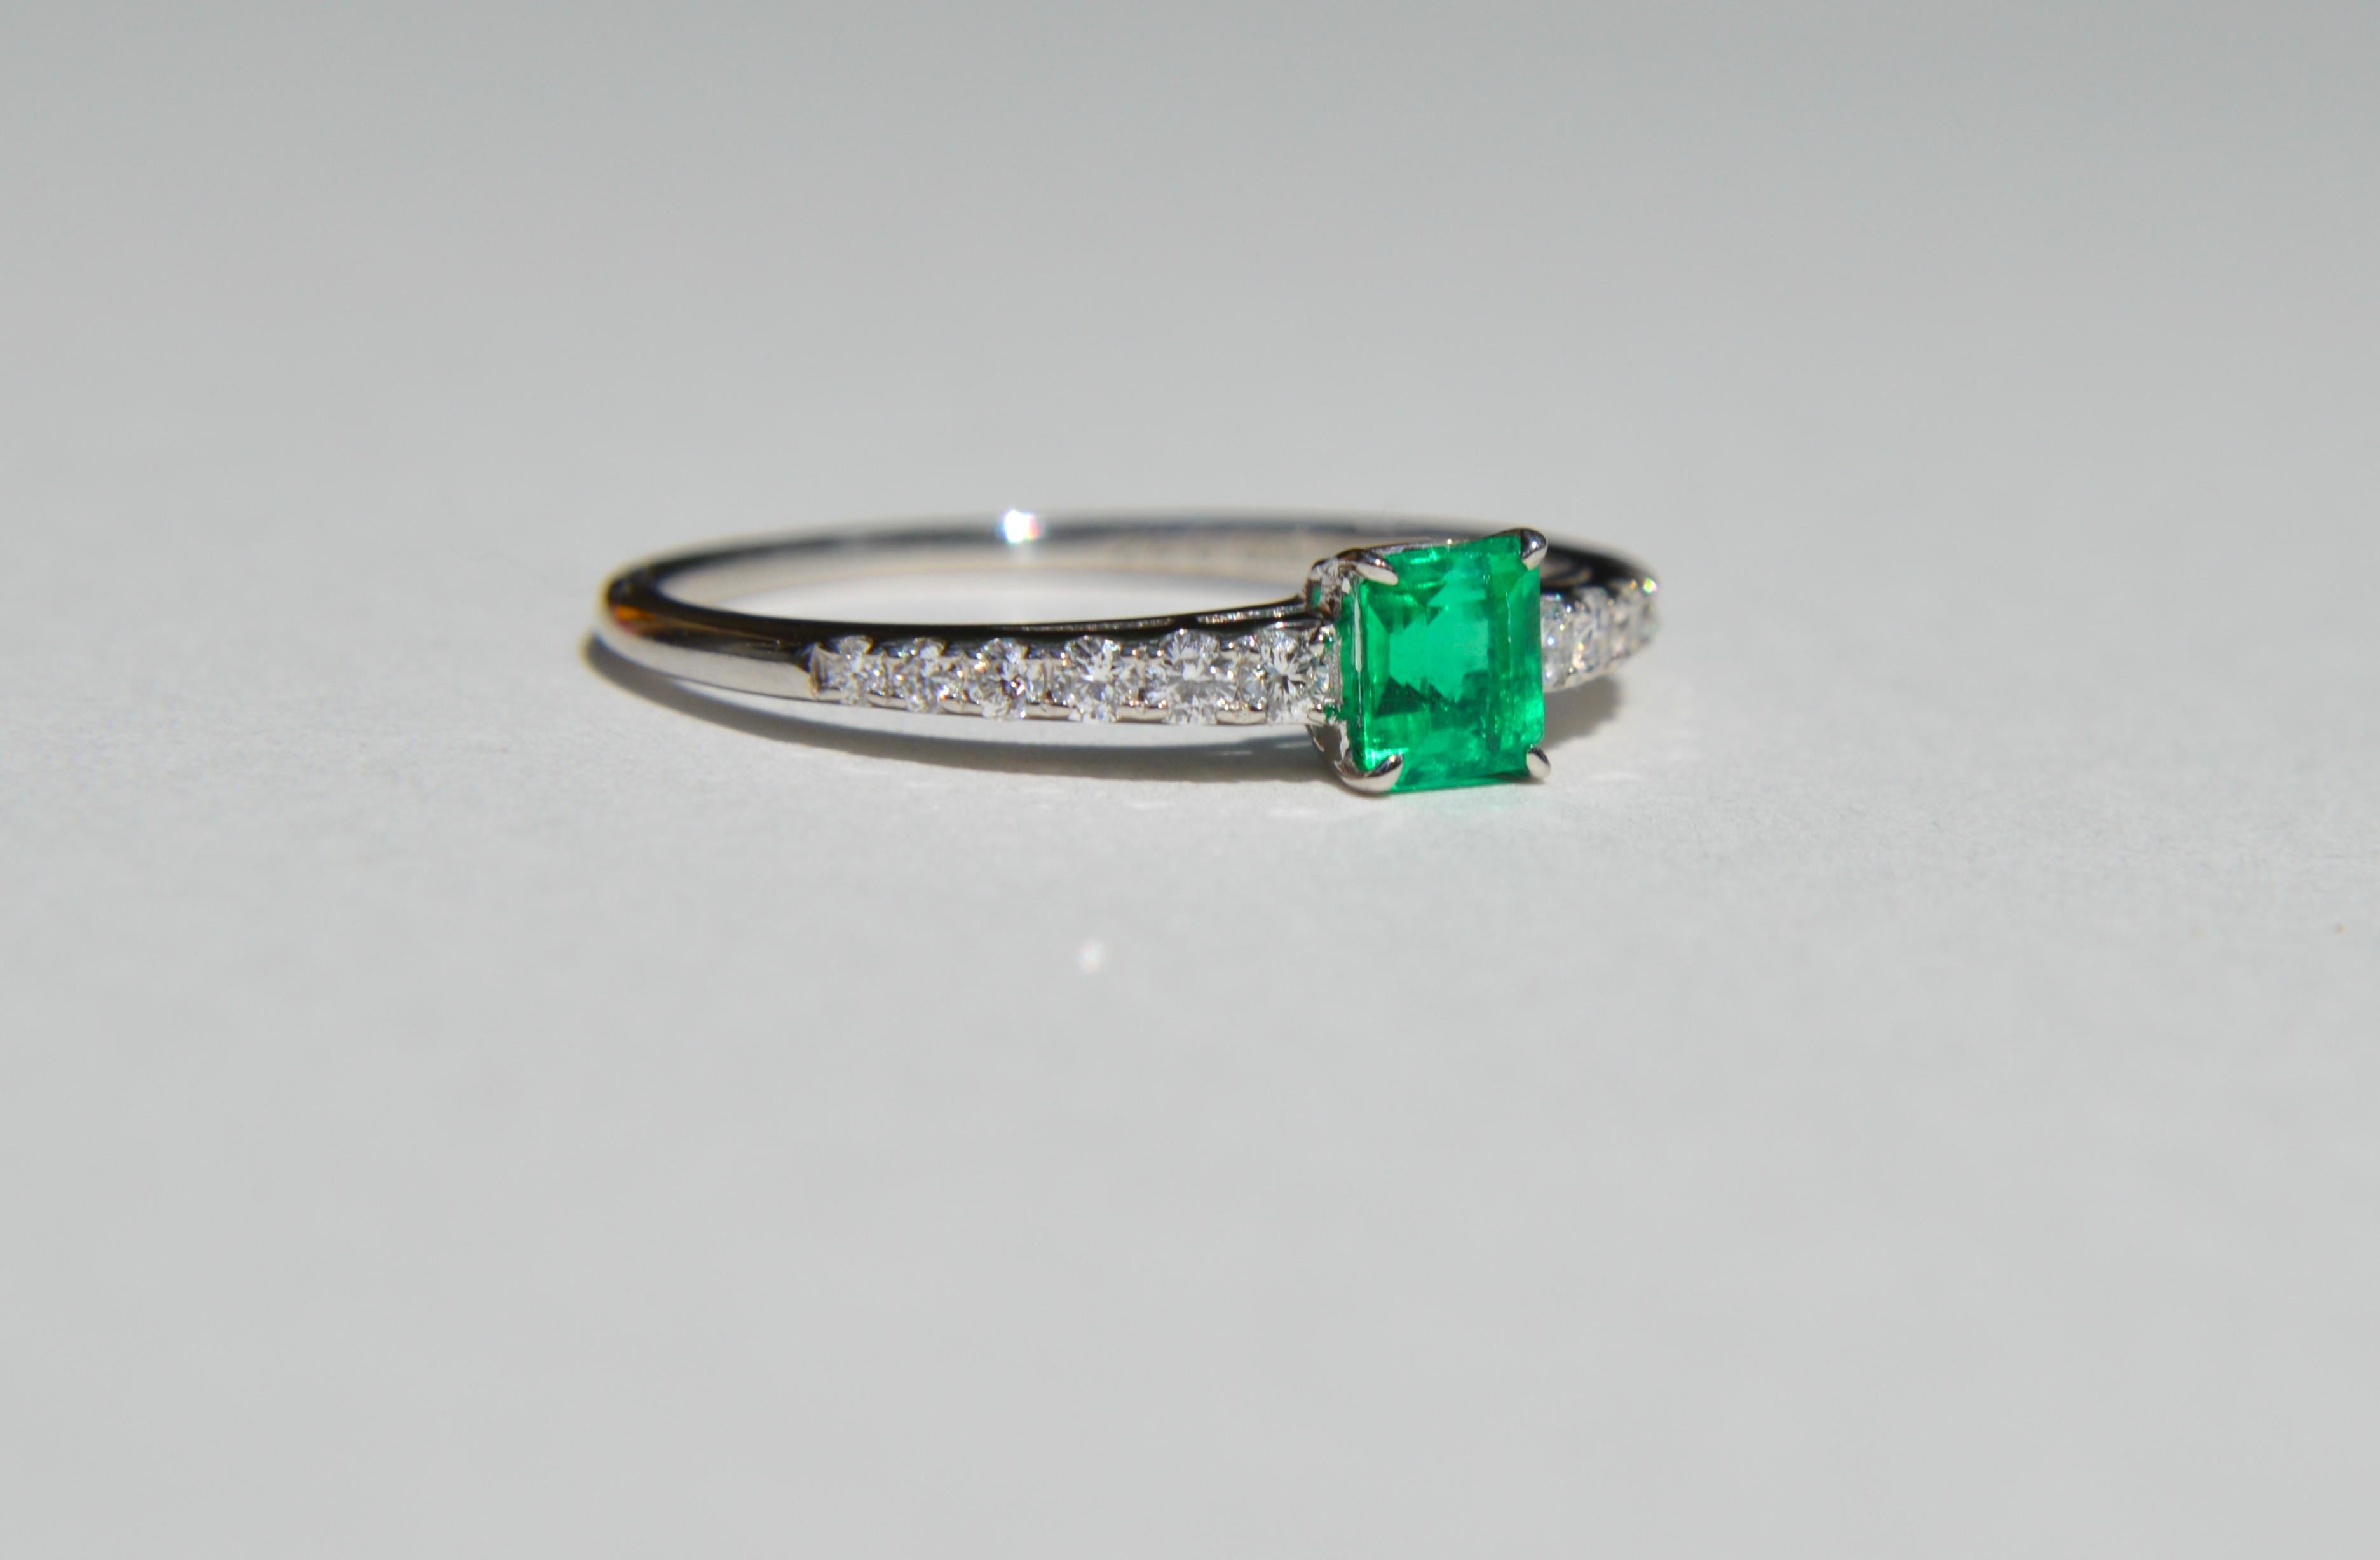 Gorgeous vintage circa 1960s Midcentury era .45 carat emerald cut natural Colombian emerald and diamond ring in solid platinum. In very good condition, shows no signs of wear. Size 7.25. The saturated rich Kelly green emerald had very little